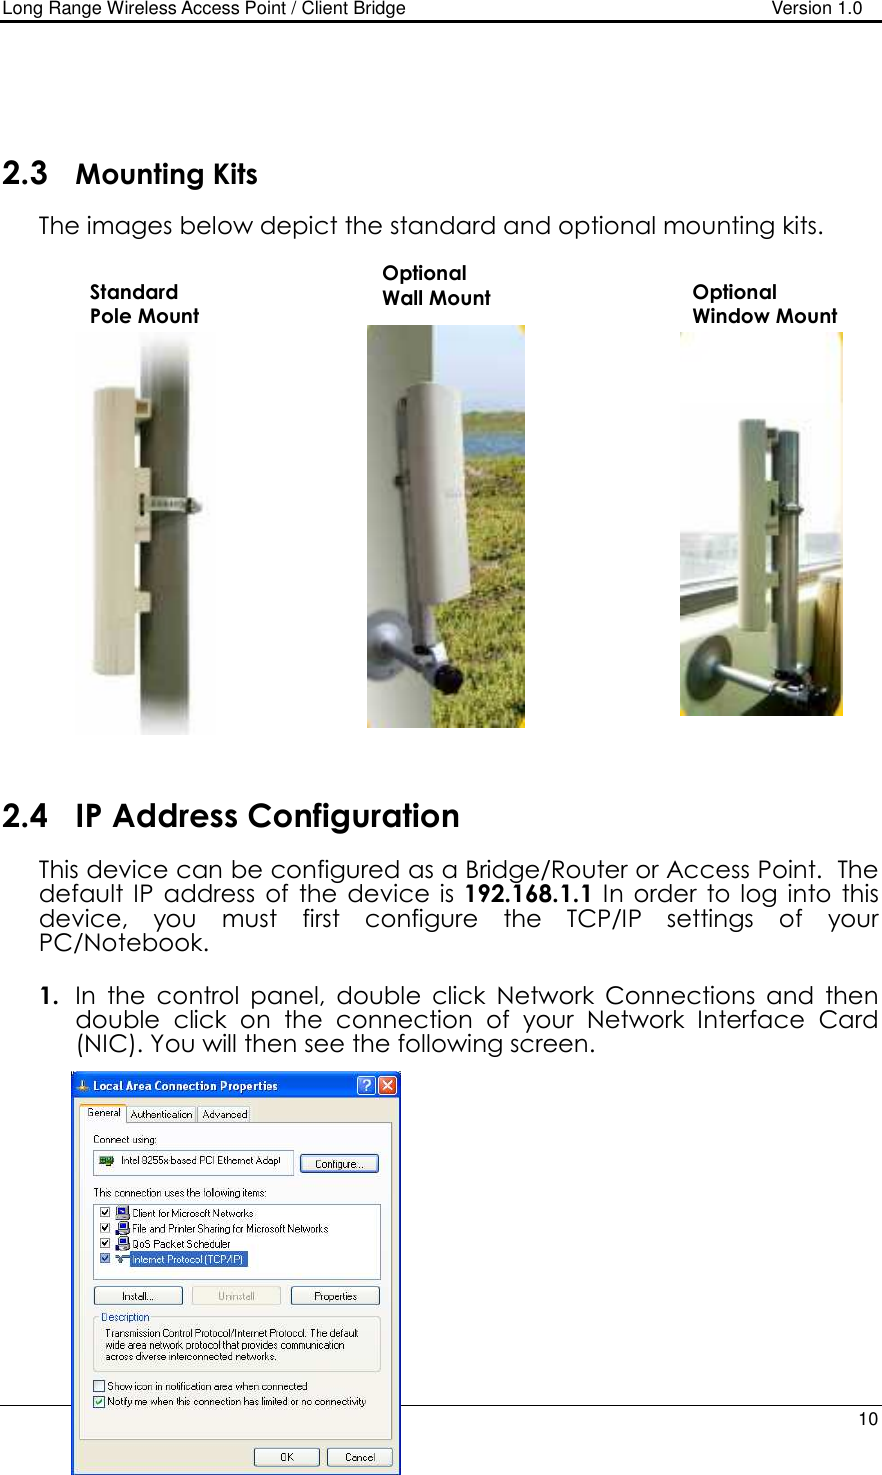 Long Range Wireless Access Point / Client Bridge                                   Version 1.0    10     2.3 Mounting Kits The images below depict the standard and optional mounting kits.                       2.4 IP Address Configuration This device can be configured as a Bridge/Router or Access Point.  The default IP  address  of  the  device  is  192.168.1.1  In  order  to log  into  this device,  you  must  first  configure  the  TCP/IP  settings  of  your PC/Notebook.   1. In  the  control  panel,  double  click  Network  Connections  and  then double  click  on  the  connection  of  your  Network  Interface  Card (NIC). You will then see the following screen.               Standard  Pole Mount Optional Wall Mount  Optional Window Mount 